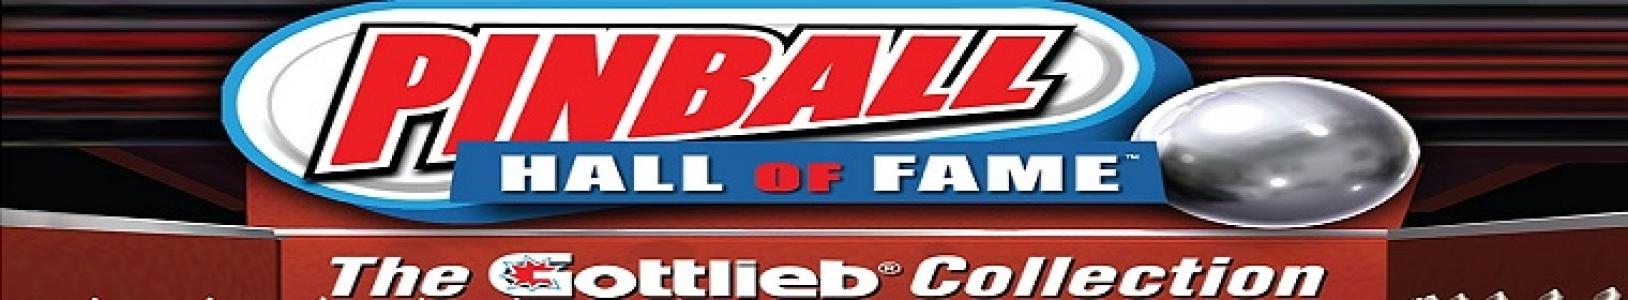 Pinball Hall of Fame: The Gottlieb Collection banner